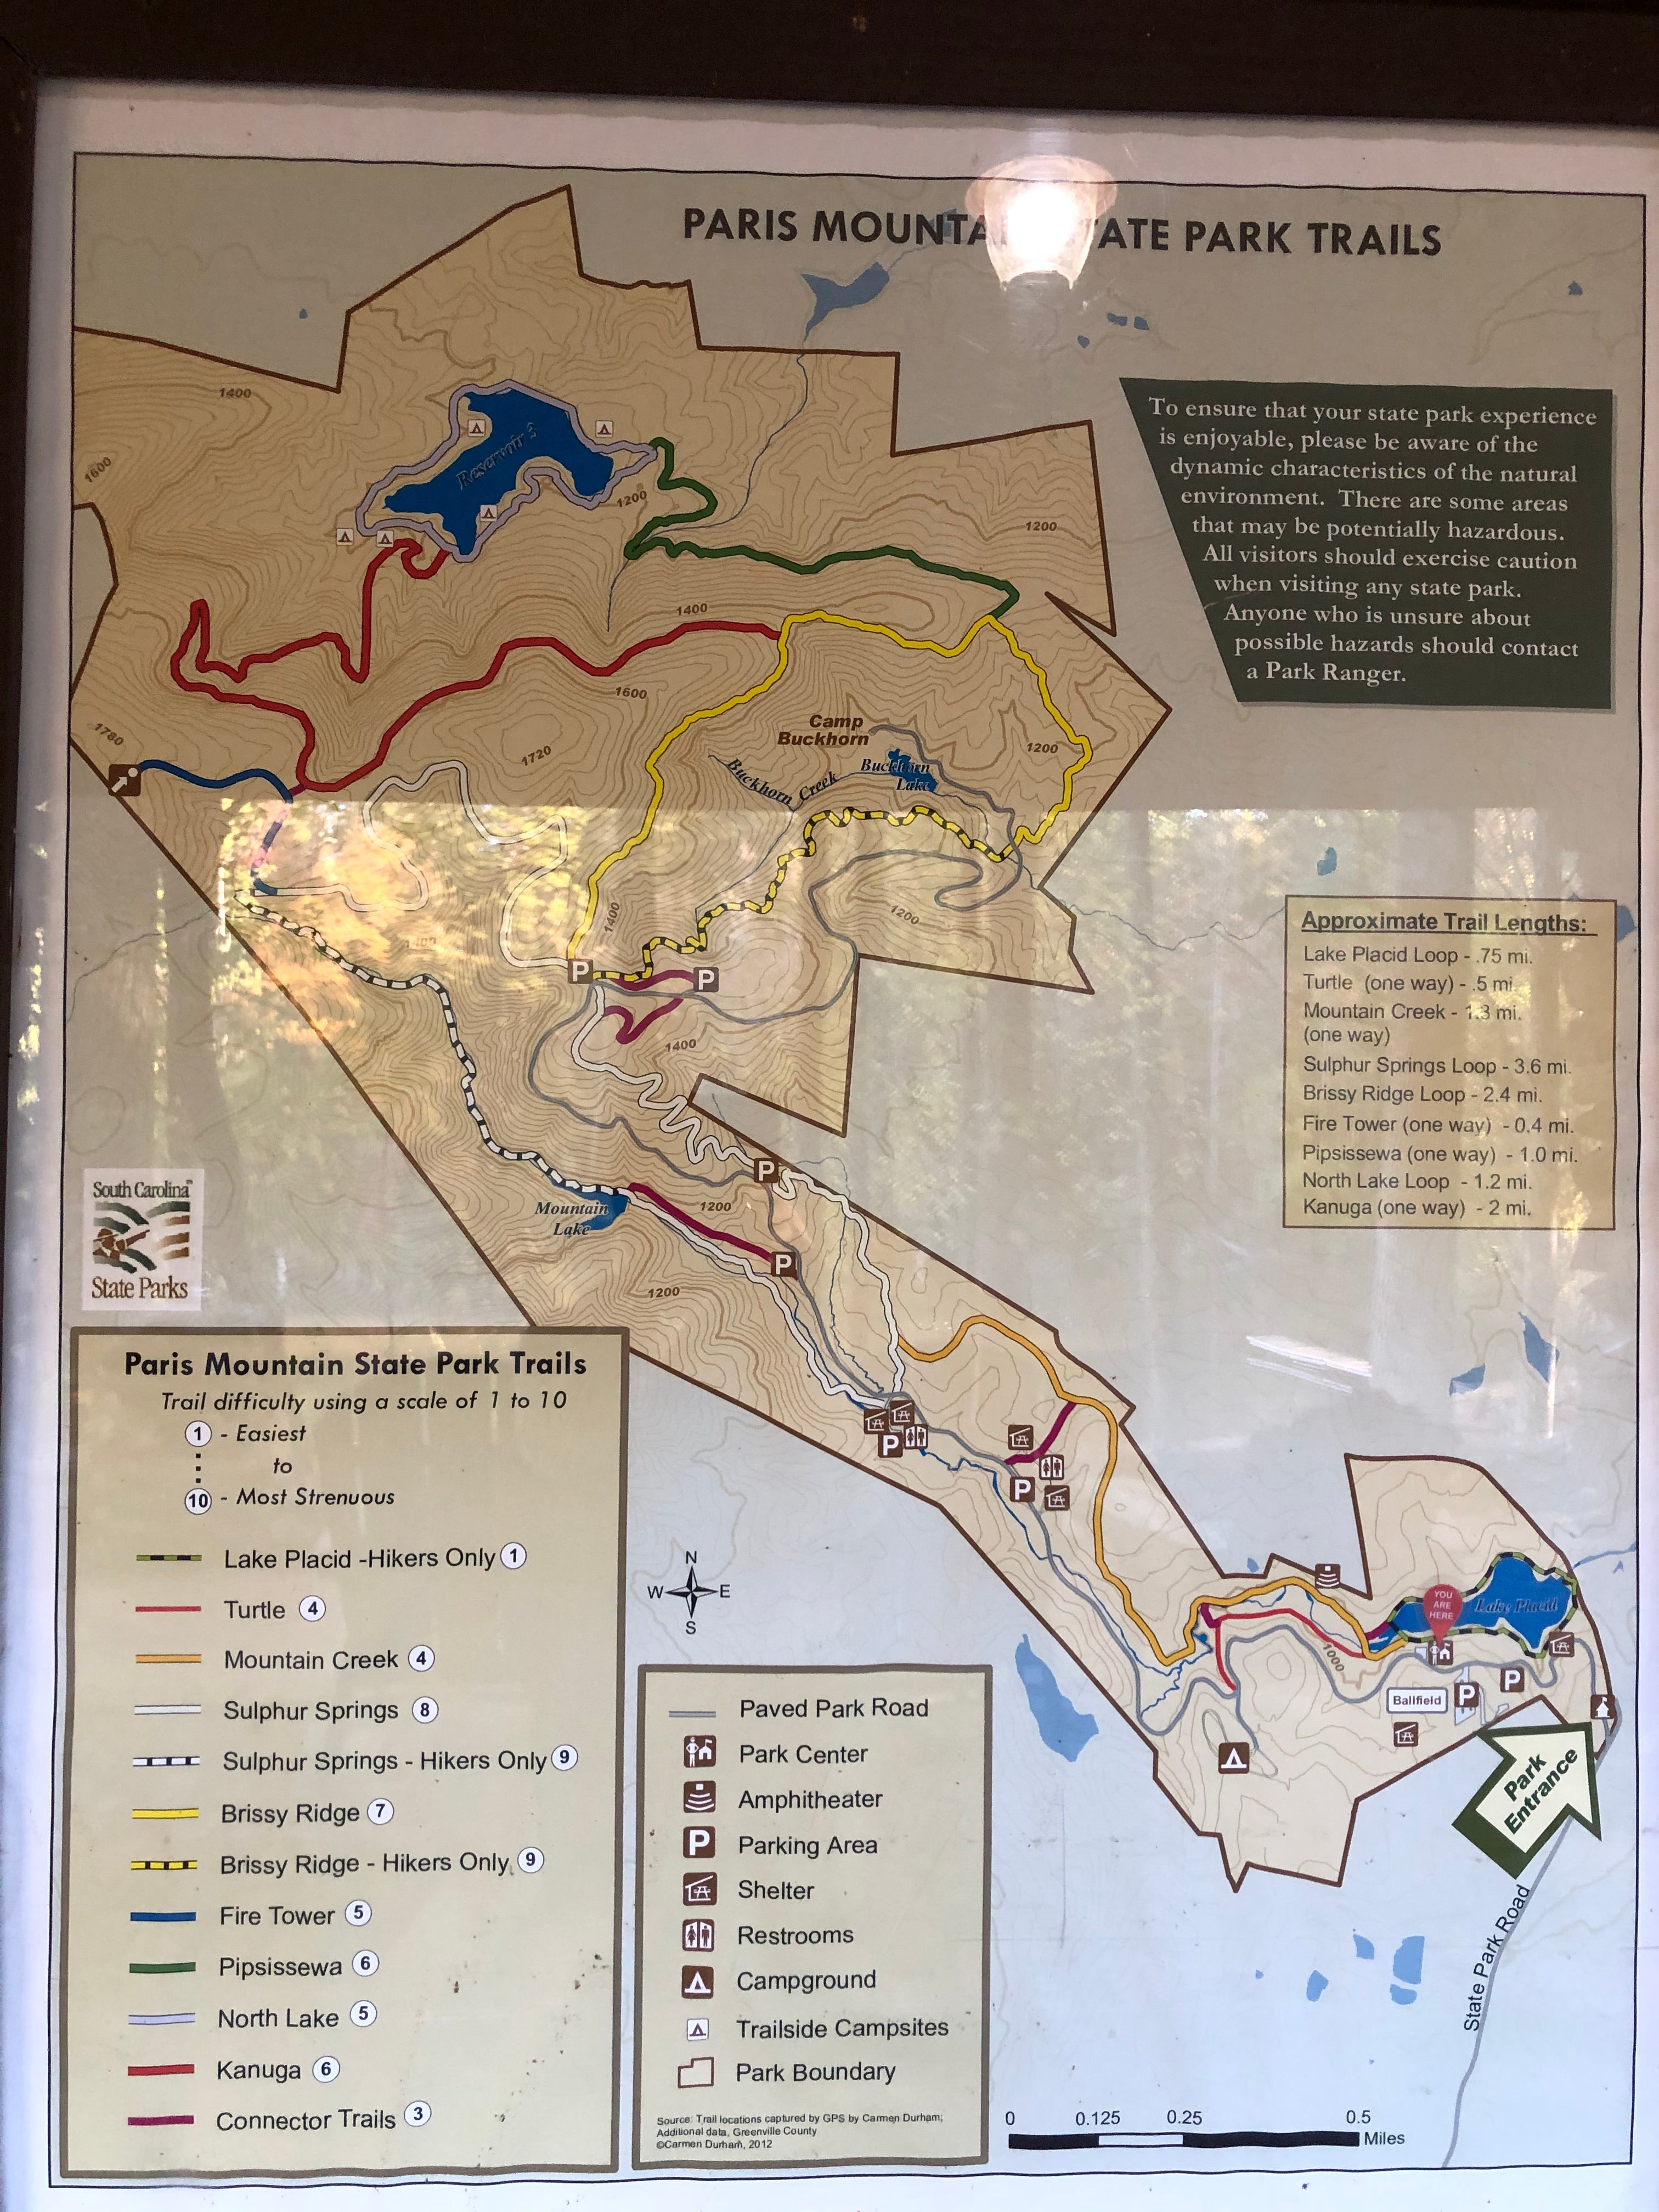 Hiking trails are posted at the park center but not on the map you are given at check-in:-(